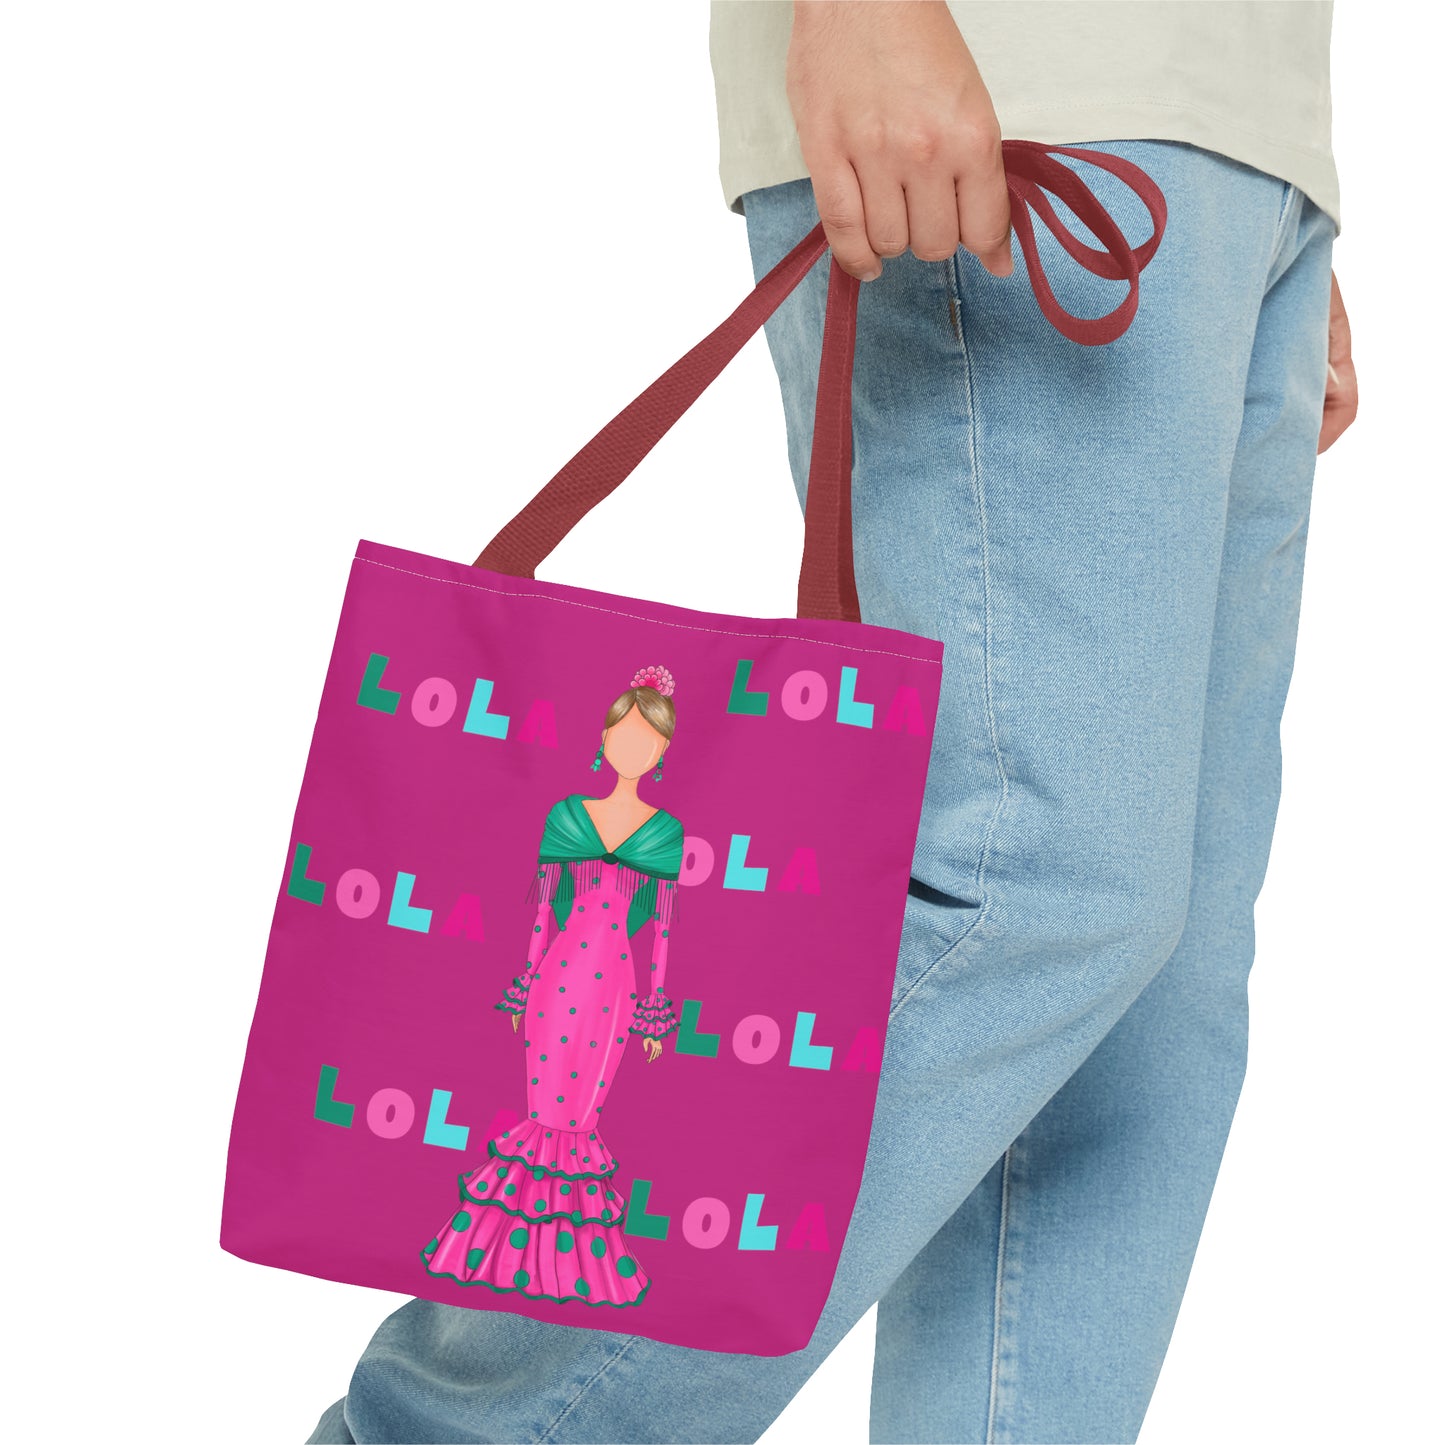 Flamenco lover Tote Bag, fabric tote bag with pink background your name in colours and our flamenco dancer Lola in a pink dress.